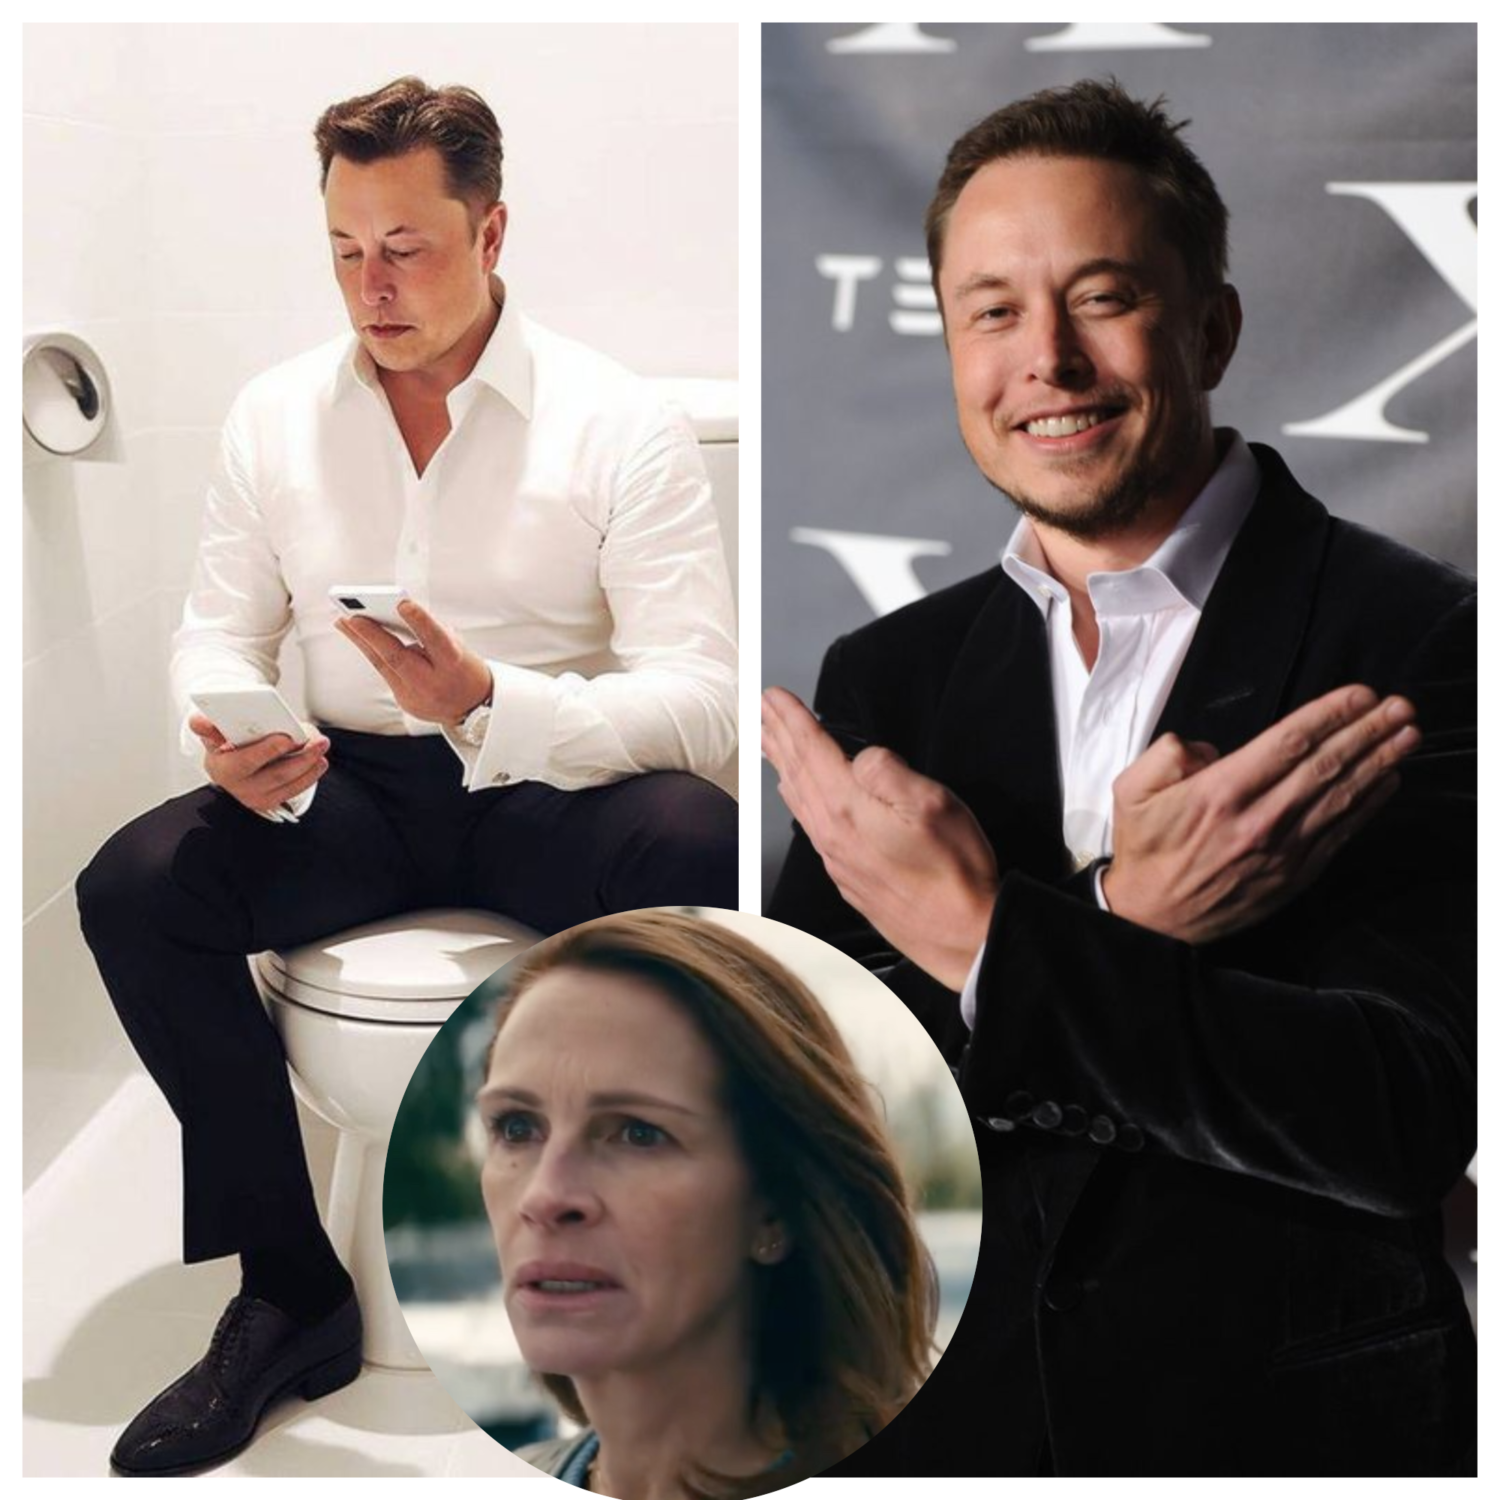 Netflix Teases Movie With Rogue Teslas Nearly Killing Julia Roberts’ Character – On Elon Musk’s X